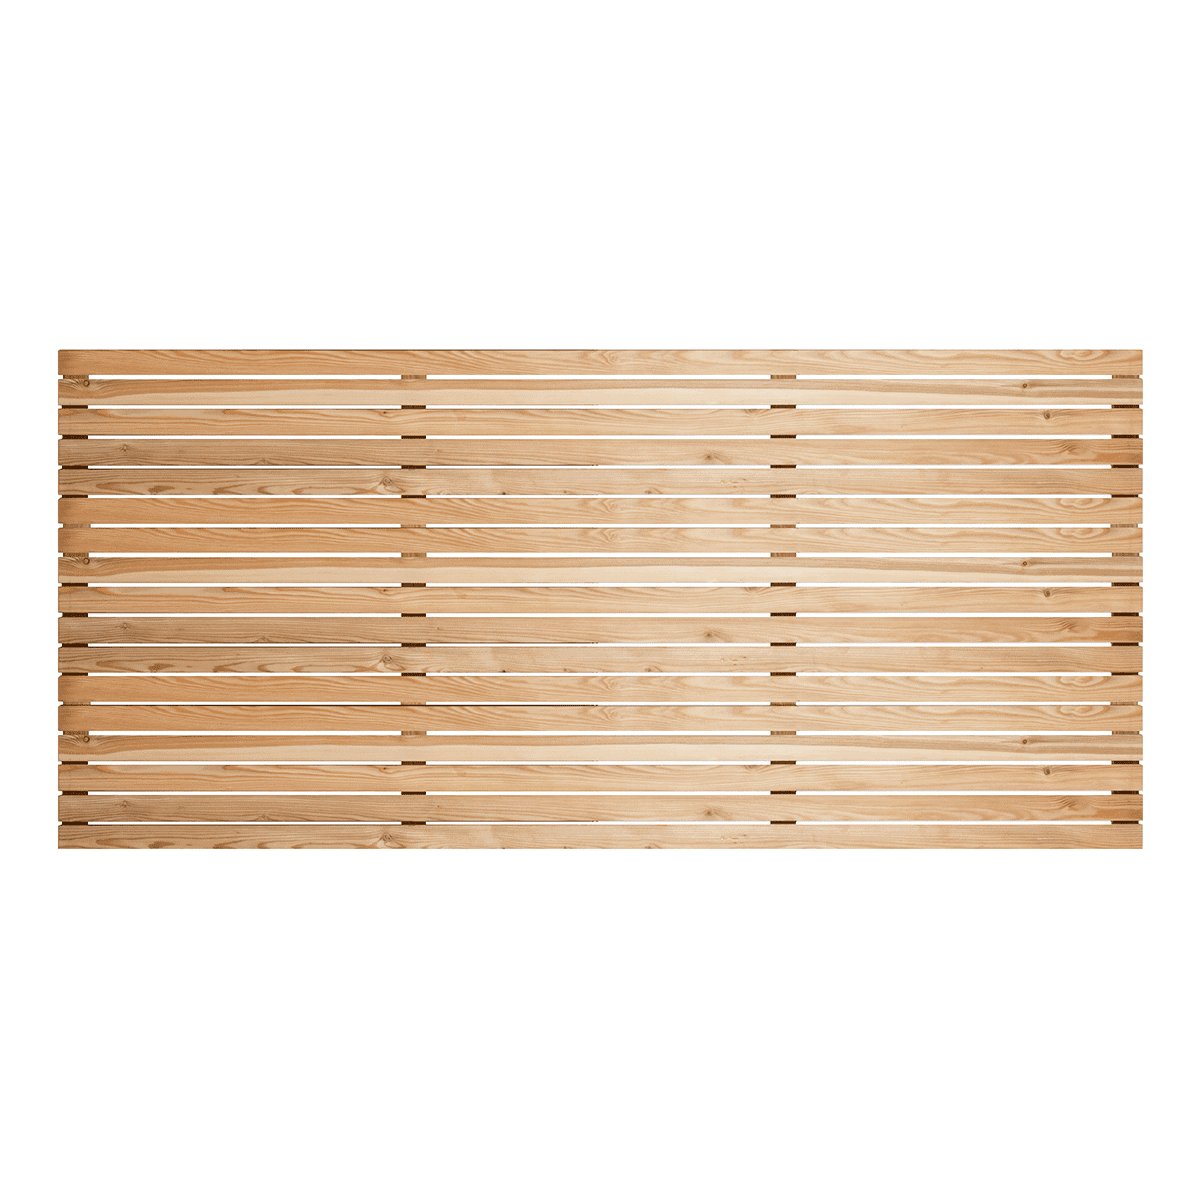 Cequence Slatted Fence Panels - Siberian Larch 900mm